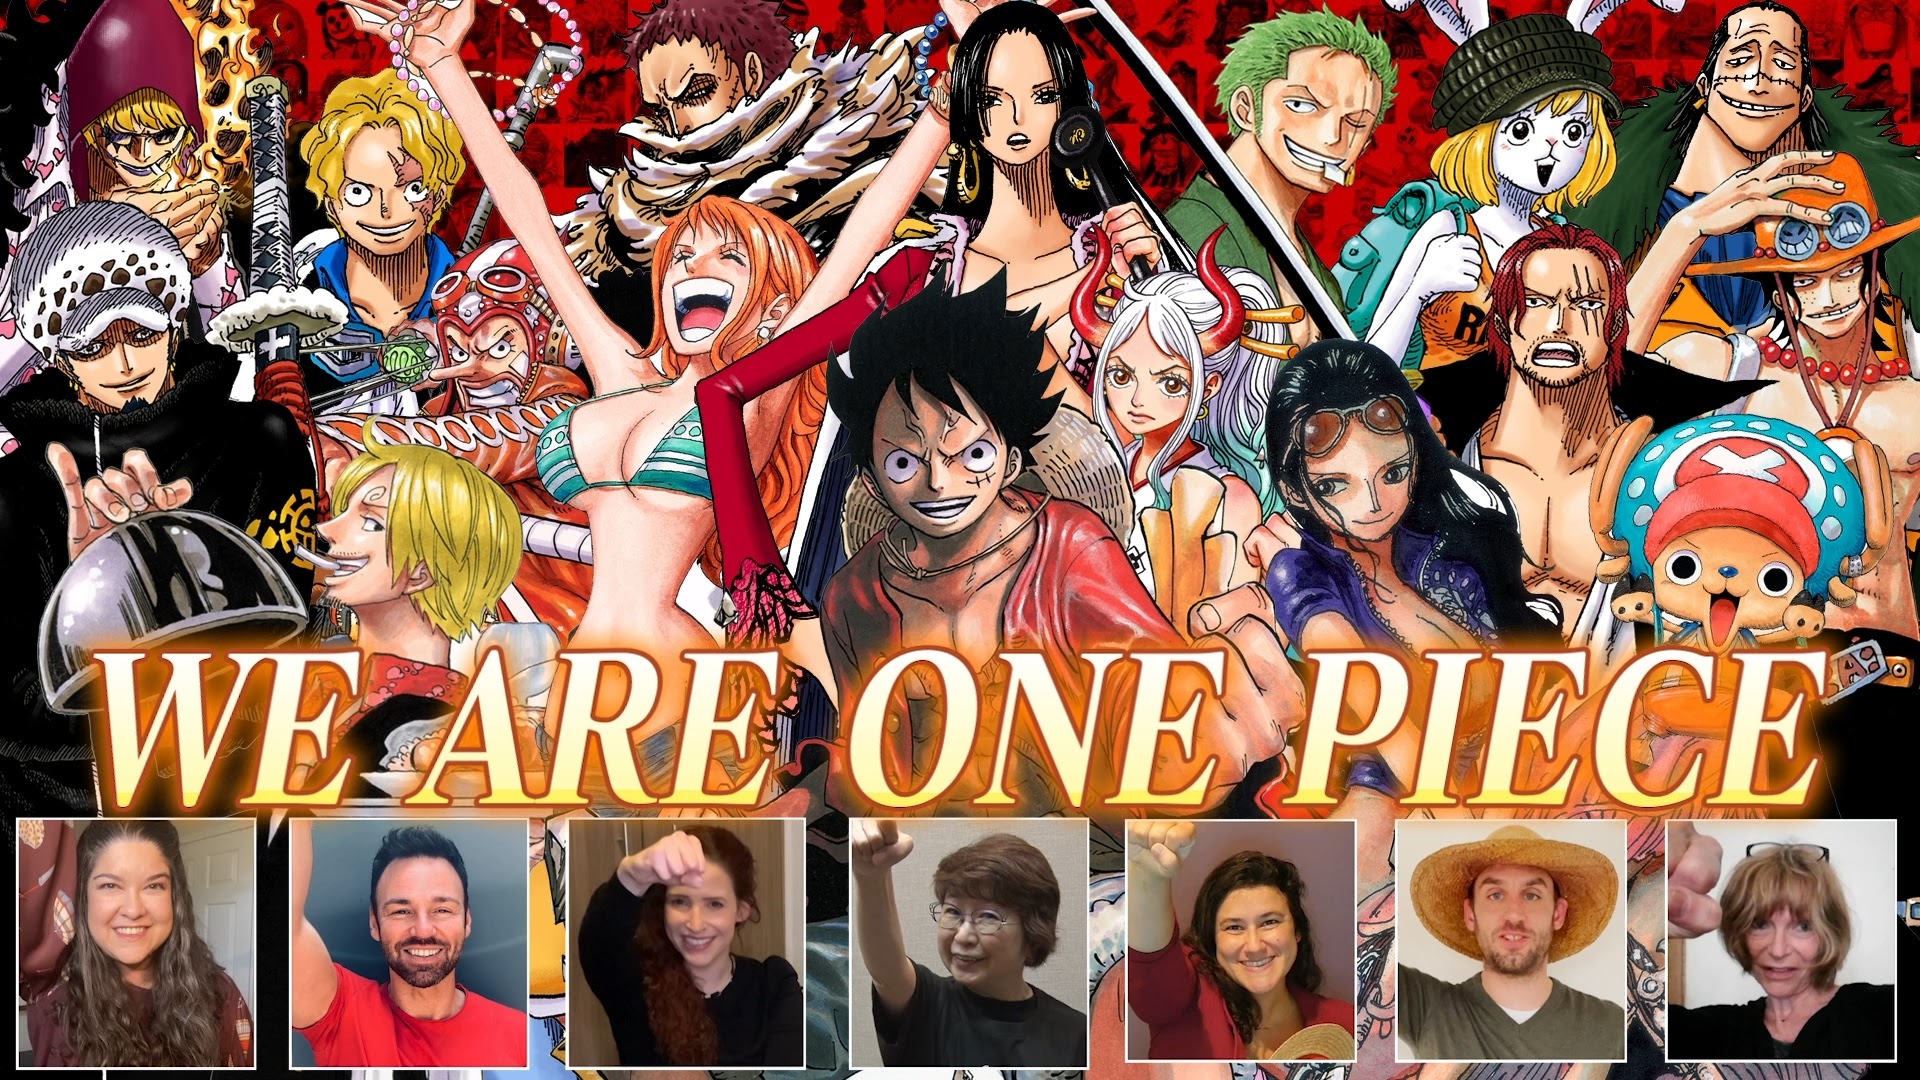 Nami One Piece Outfits – A do it yourself guide